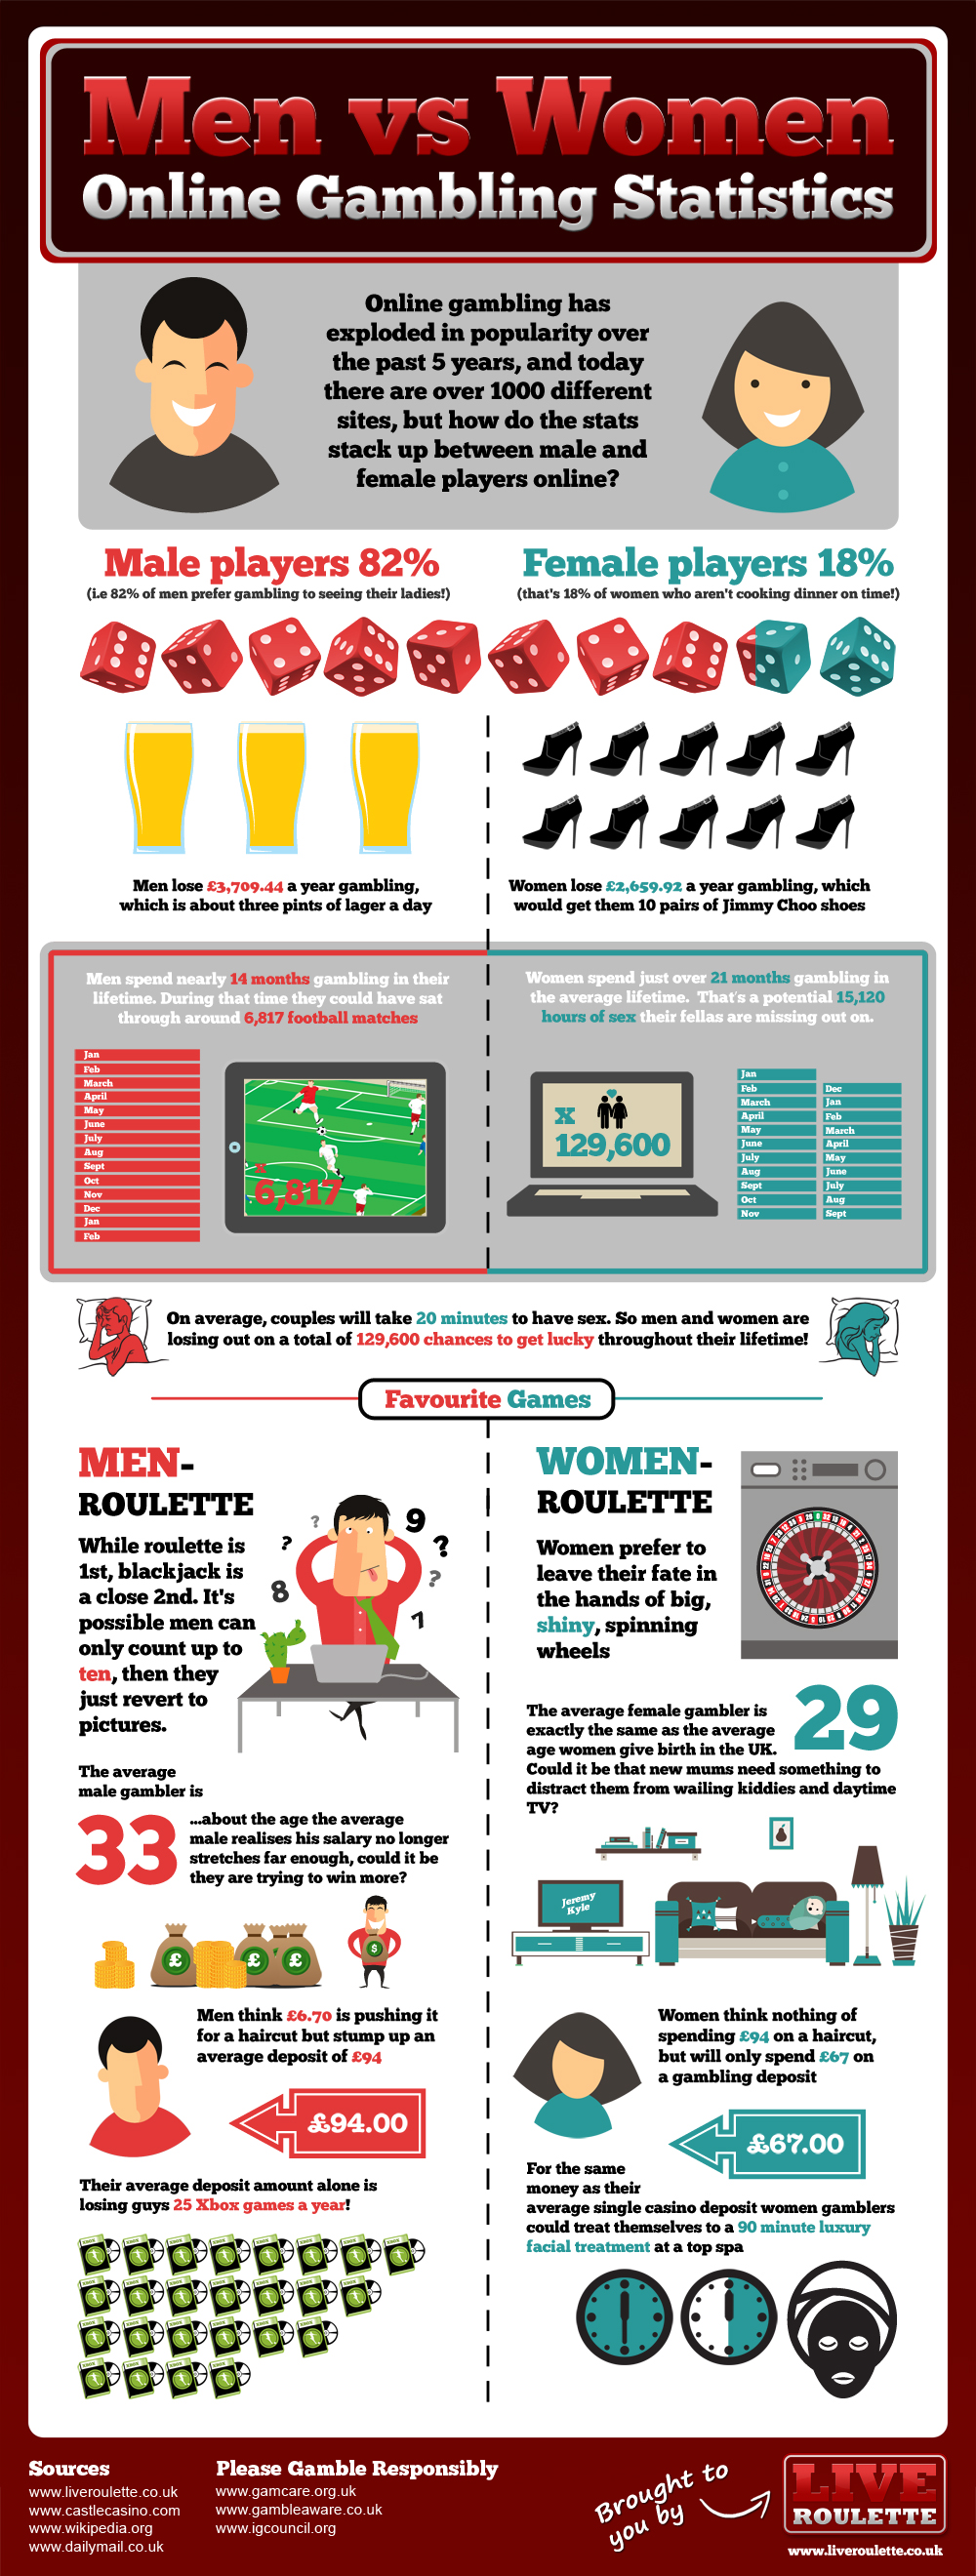 Online Gambling Statistics: Battle of The Sexes [INFOGRAPHIC]